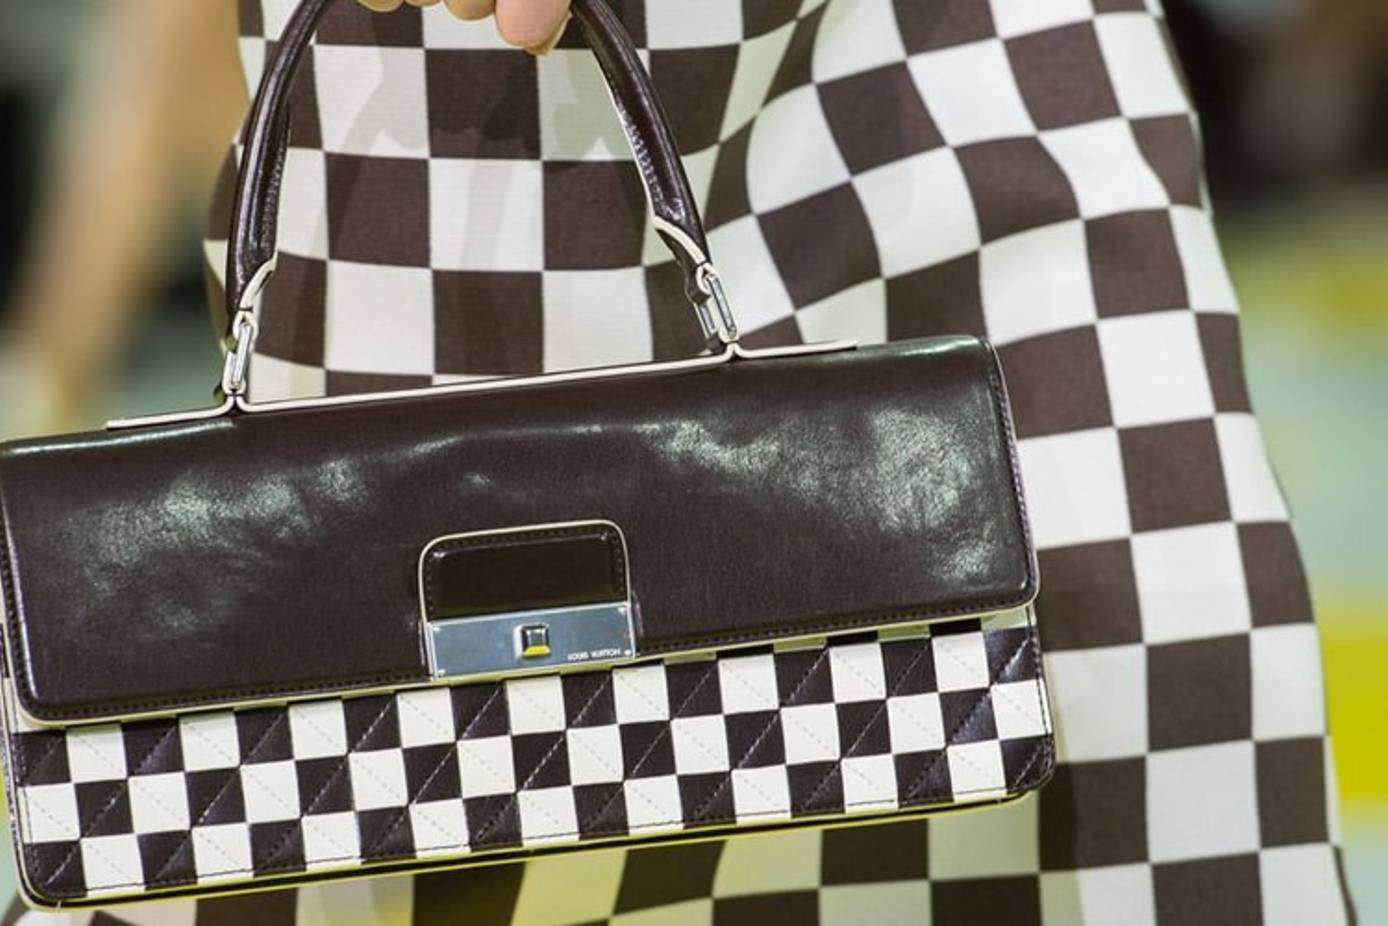 Louis Vuitton and the Strange Case of the Checkerboard Pattern